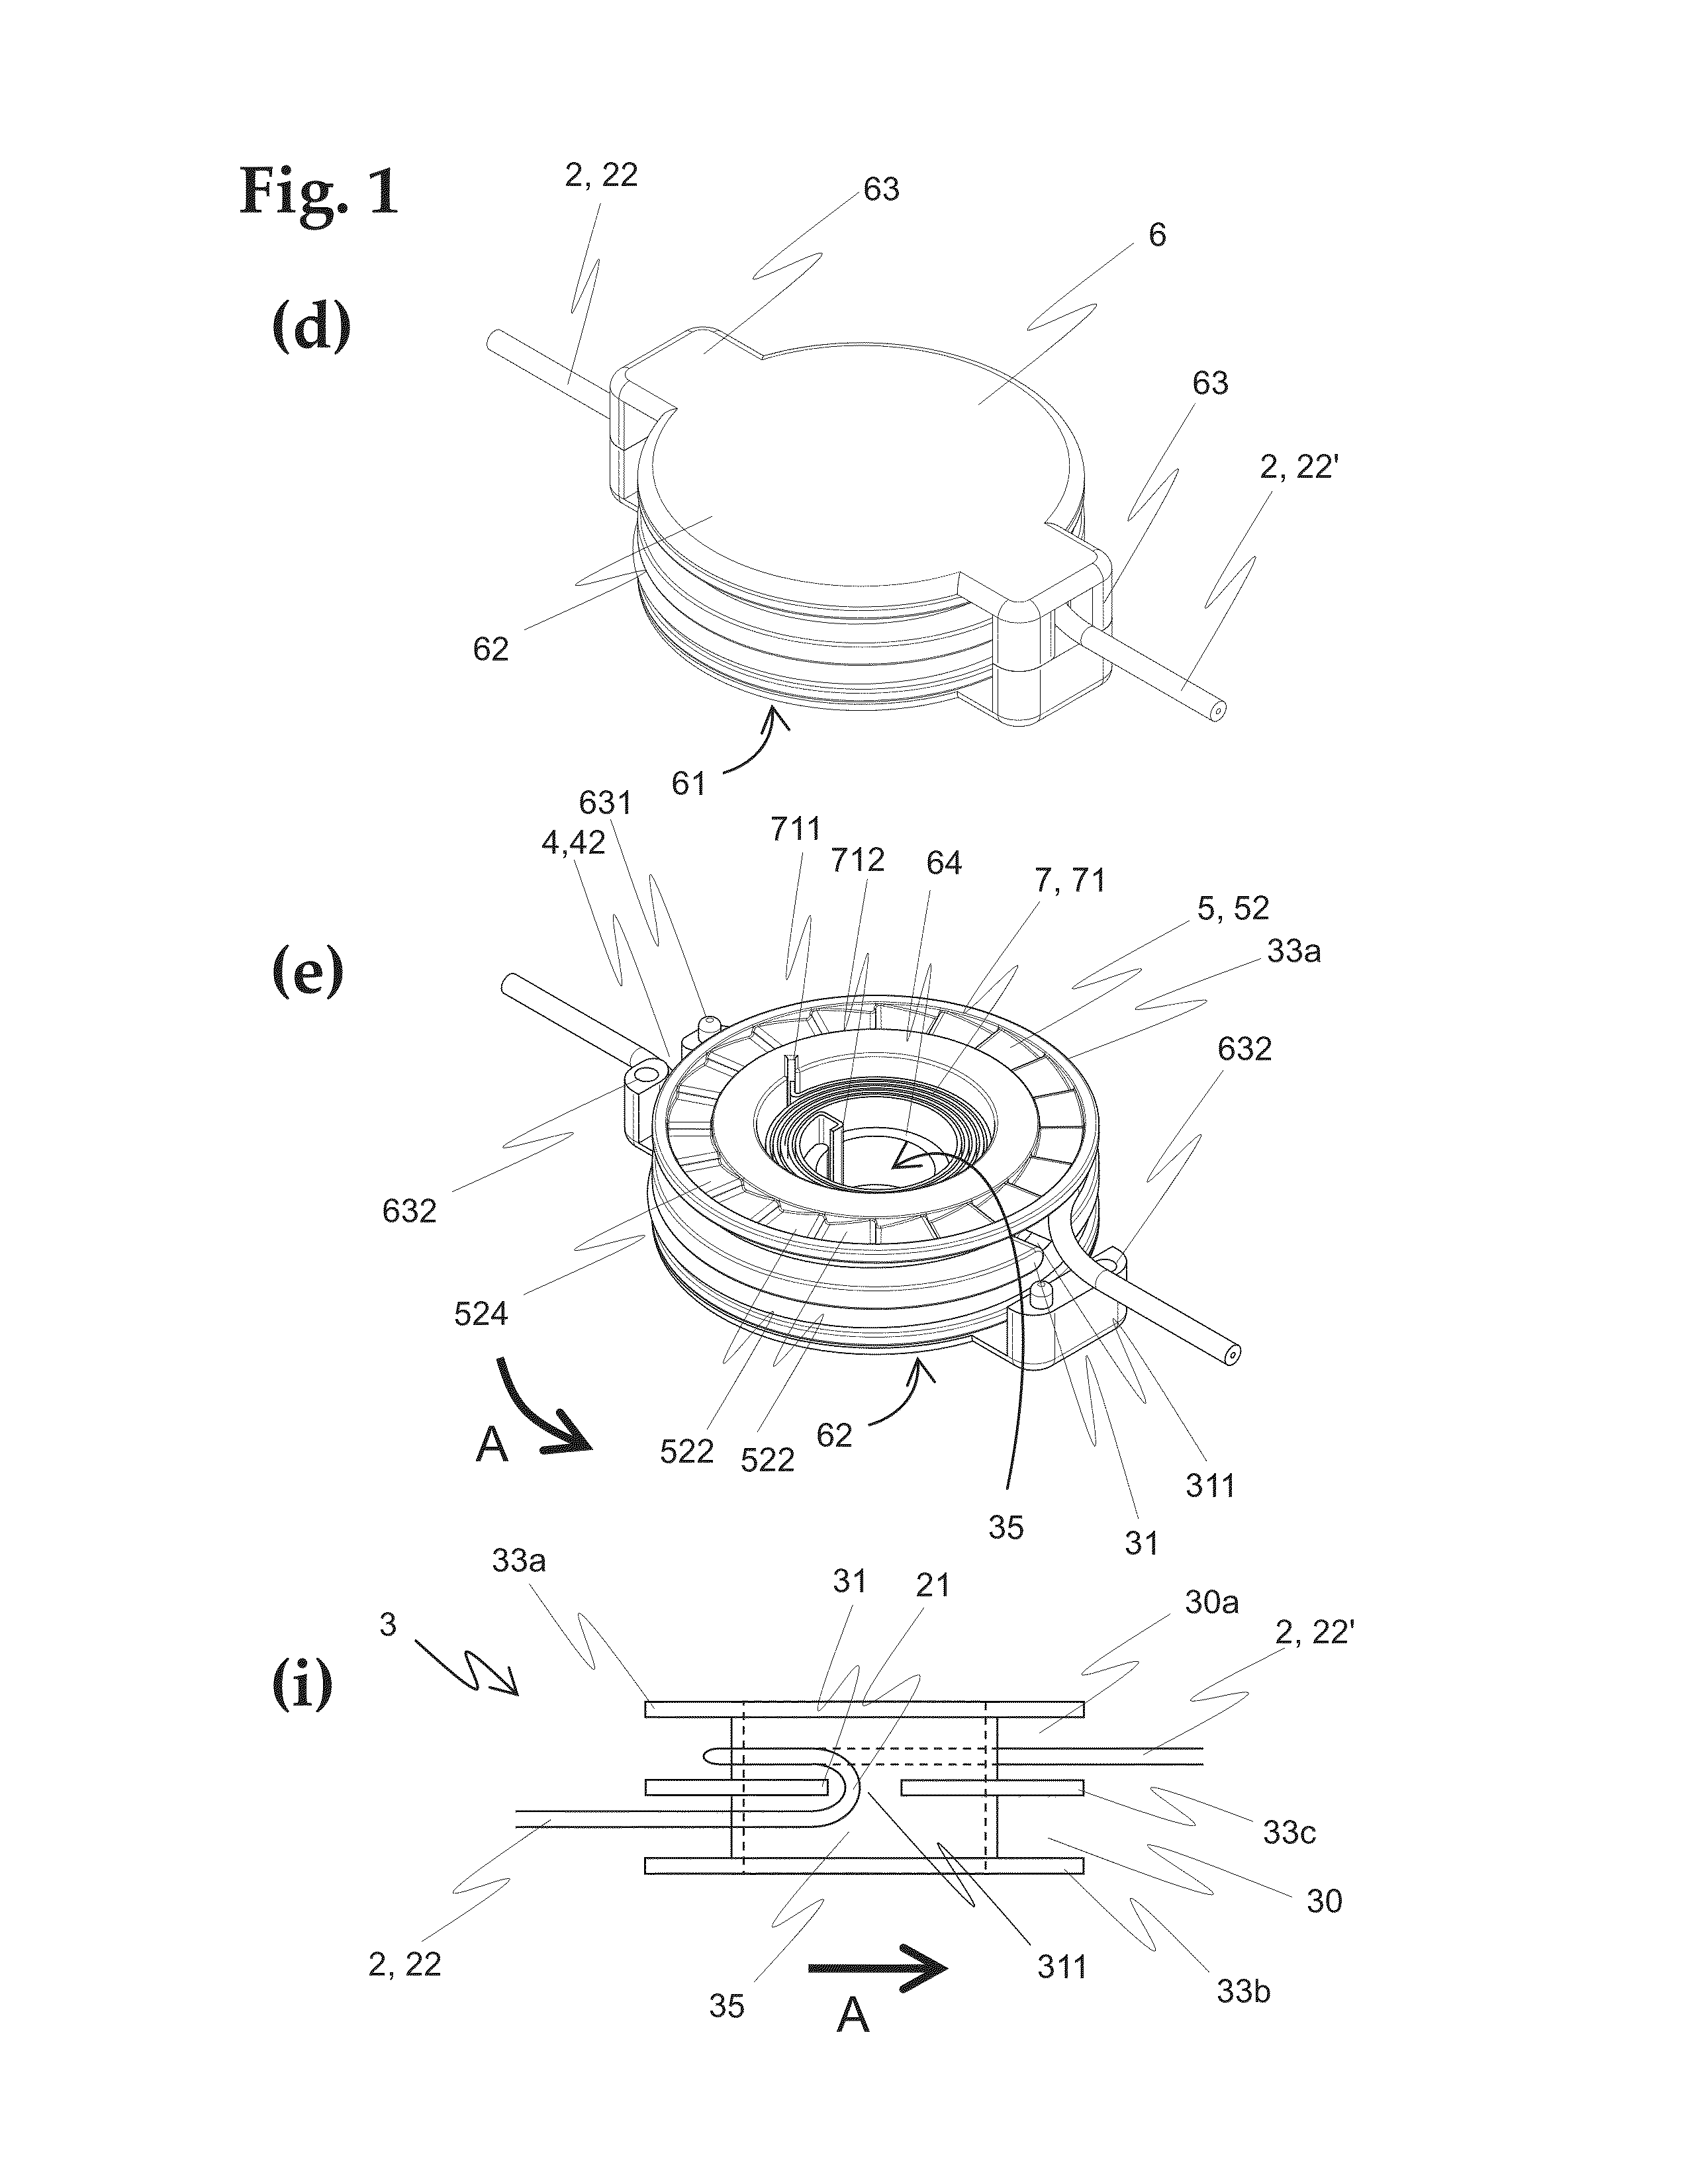 Device for adjusting the length of infusion tubing